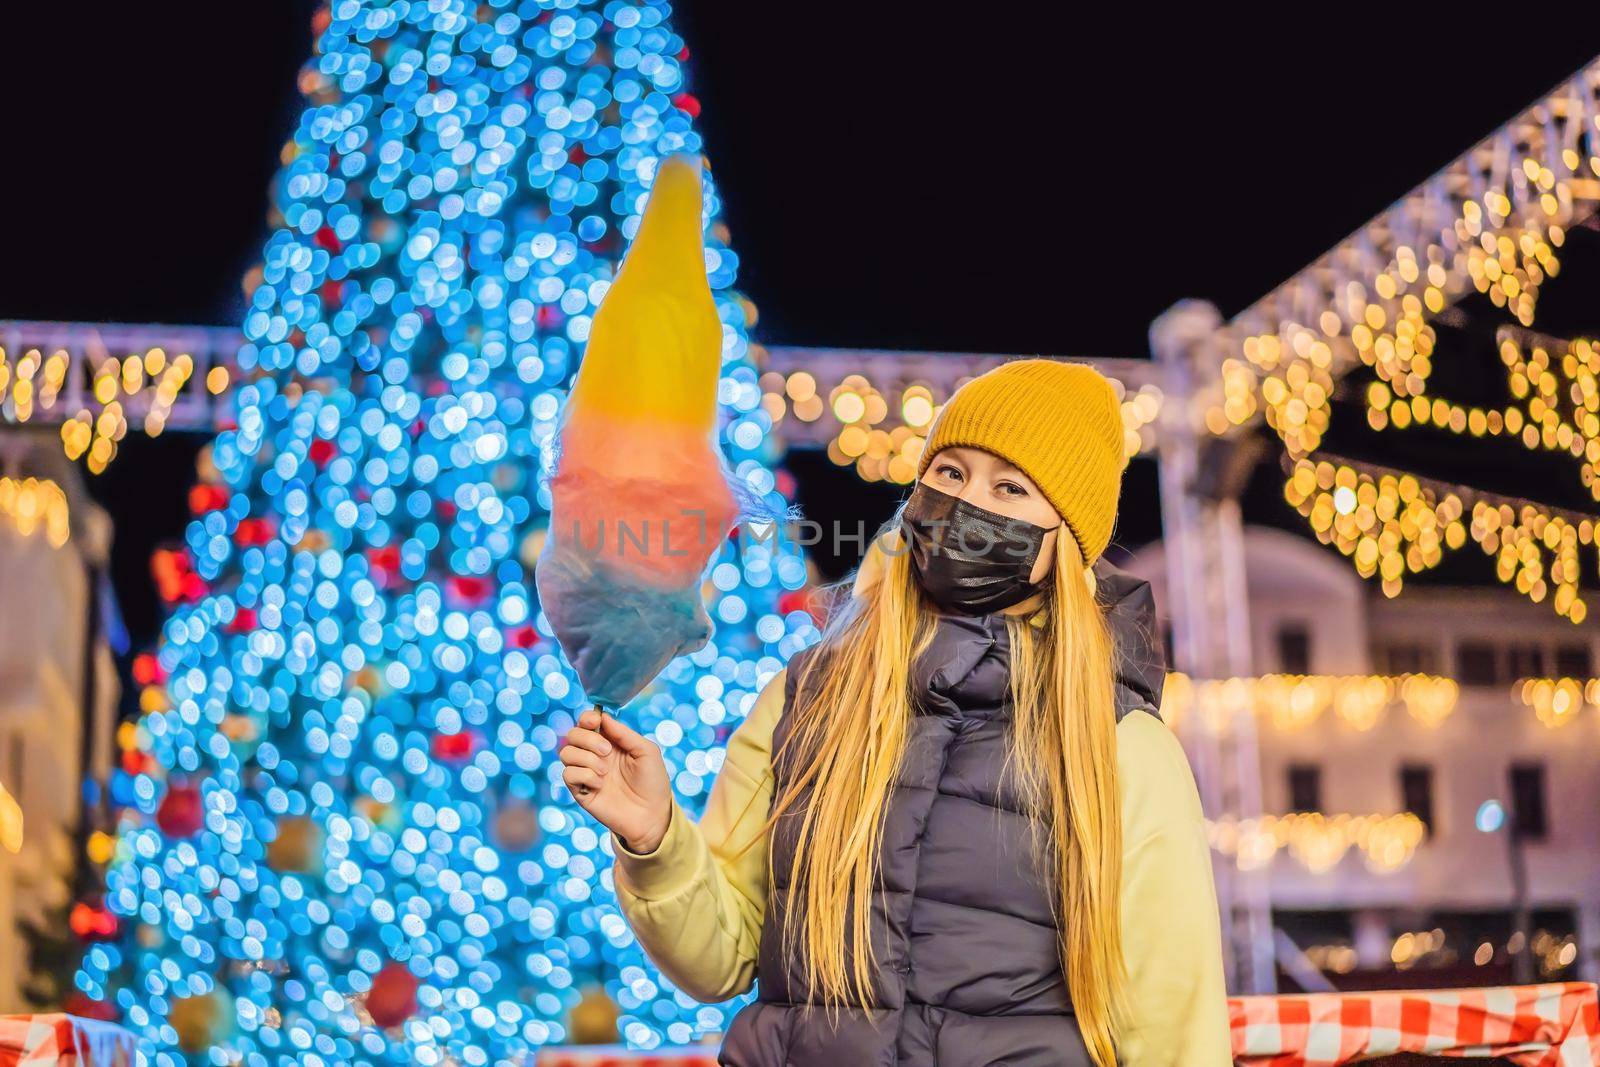 Young woman holding a cotton candy and smiling at a Christmas fair wearing a yellow wool cap wears a medical mask against coronavirus COVID 19 by galitskaya